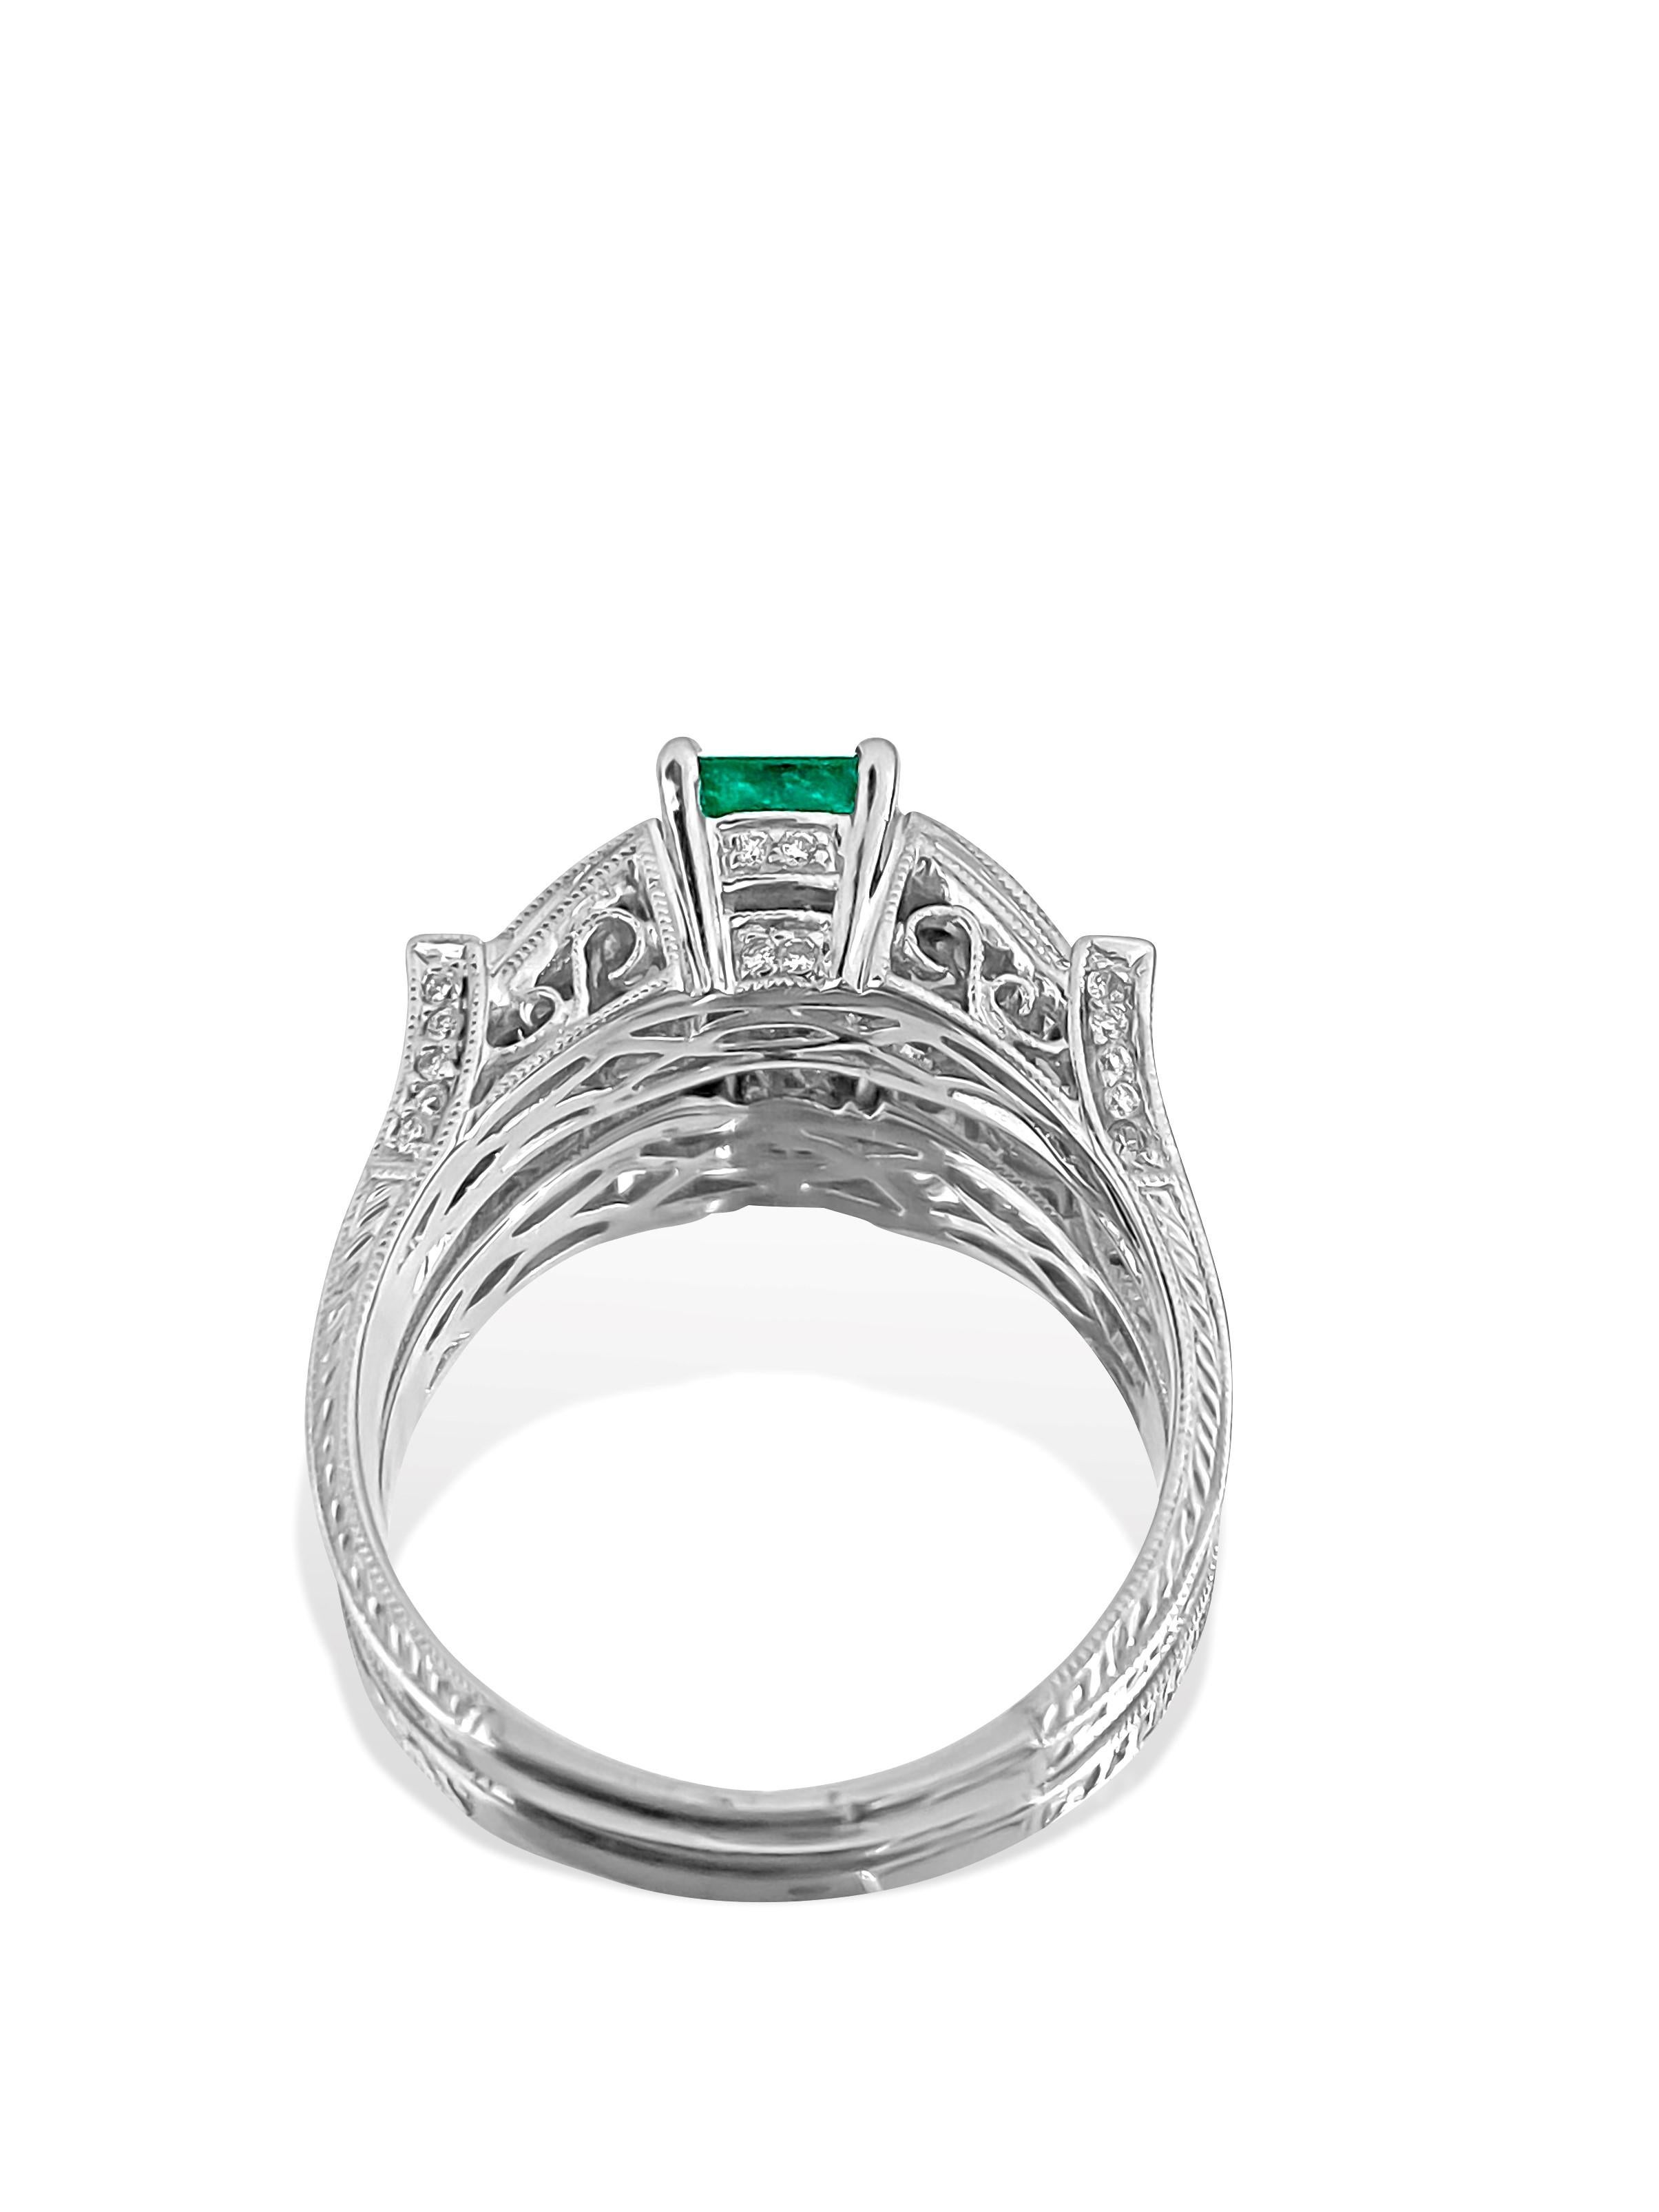 Vintage 1.50 Carat Colombian Emerald Diamond Cocktail Engagement Ring In New Condition For Sale In Miami, FL